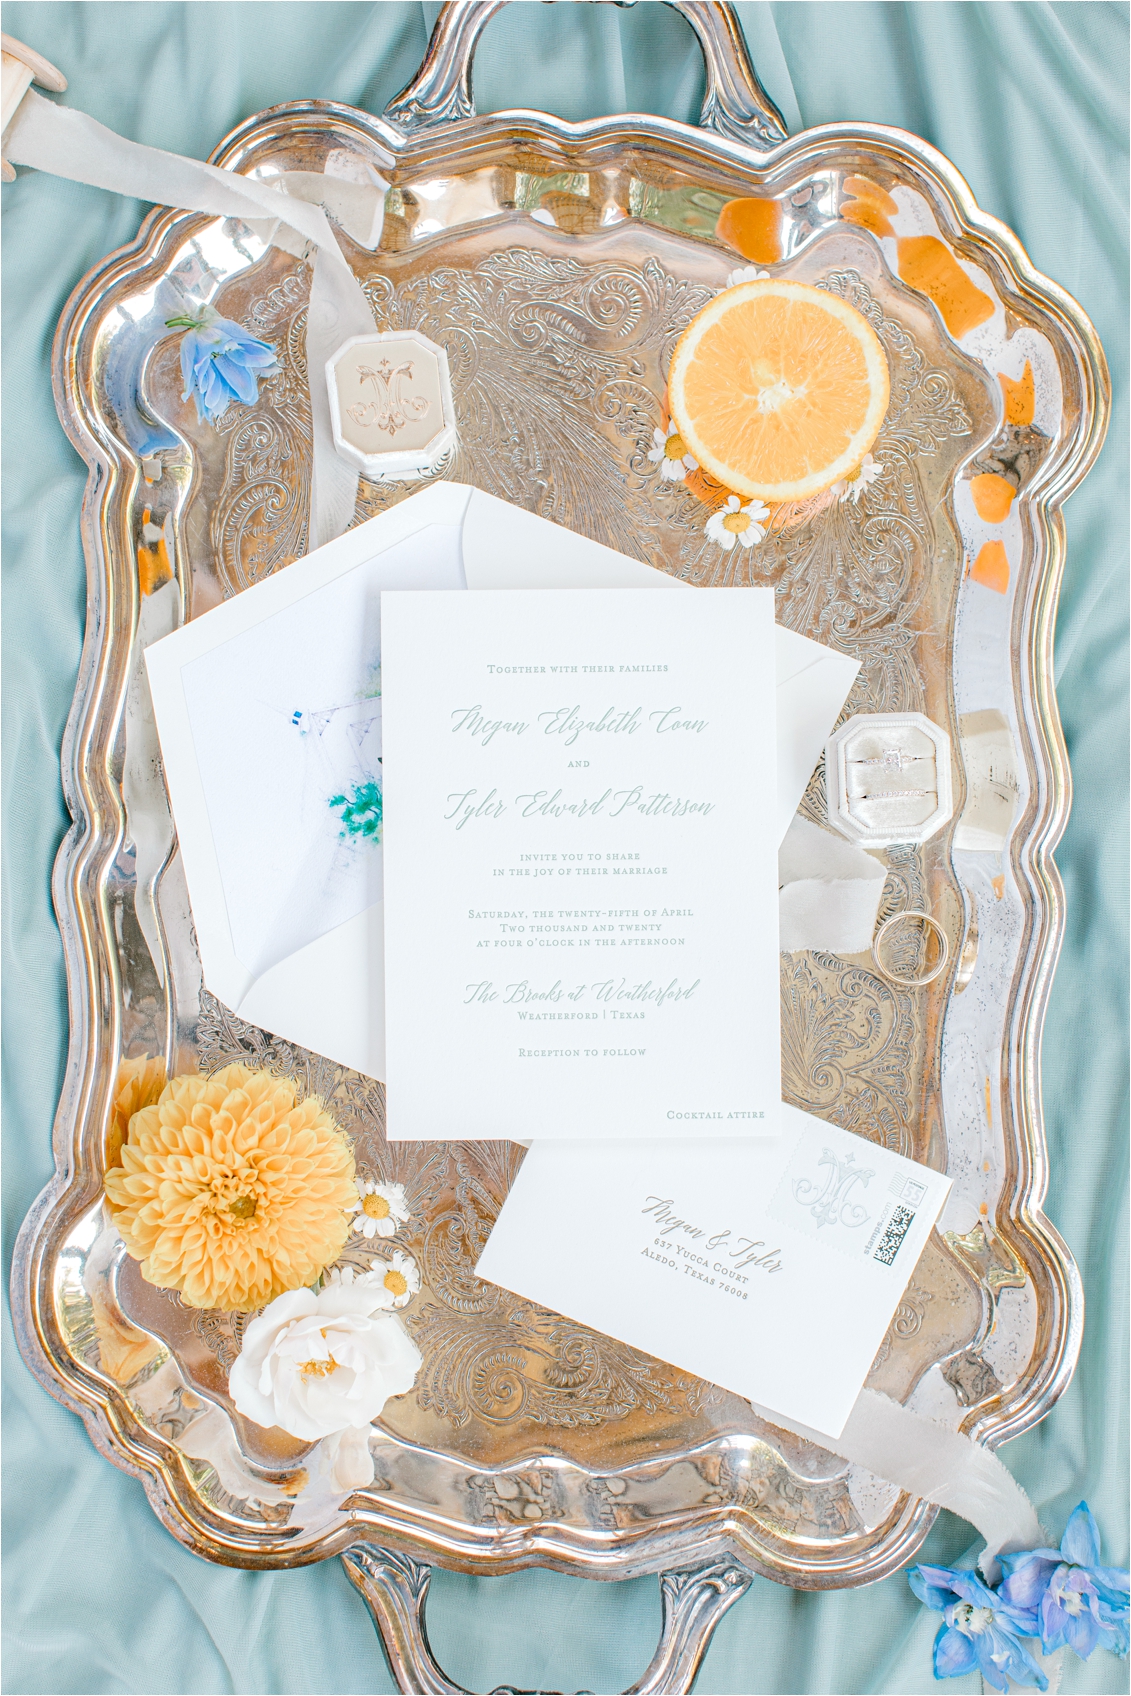 wedding invitation and rings on a vintage tray